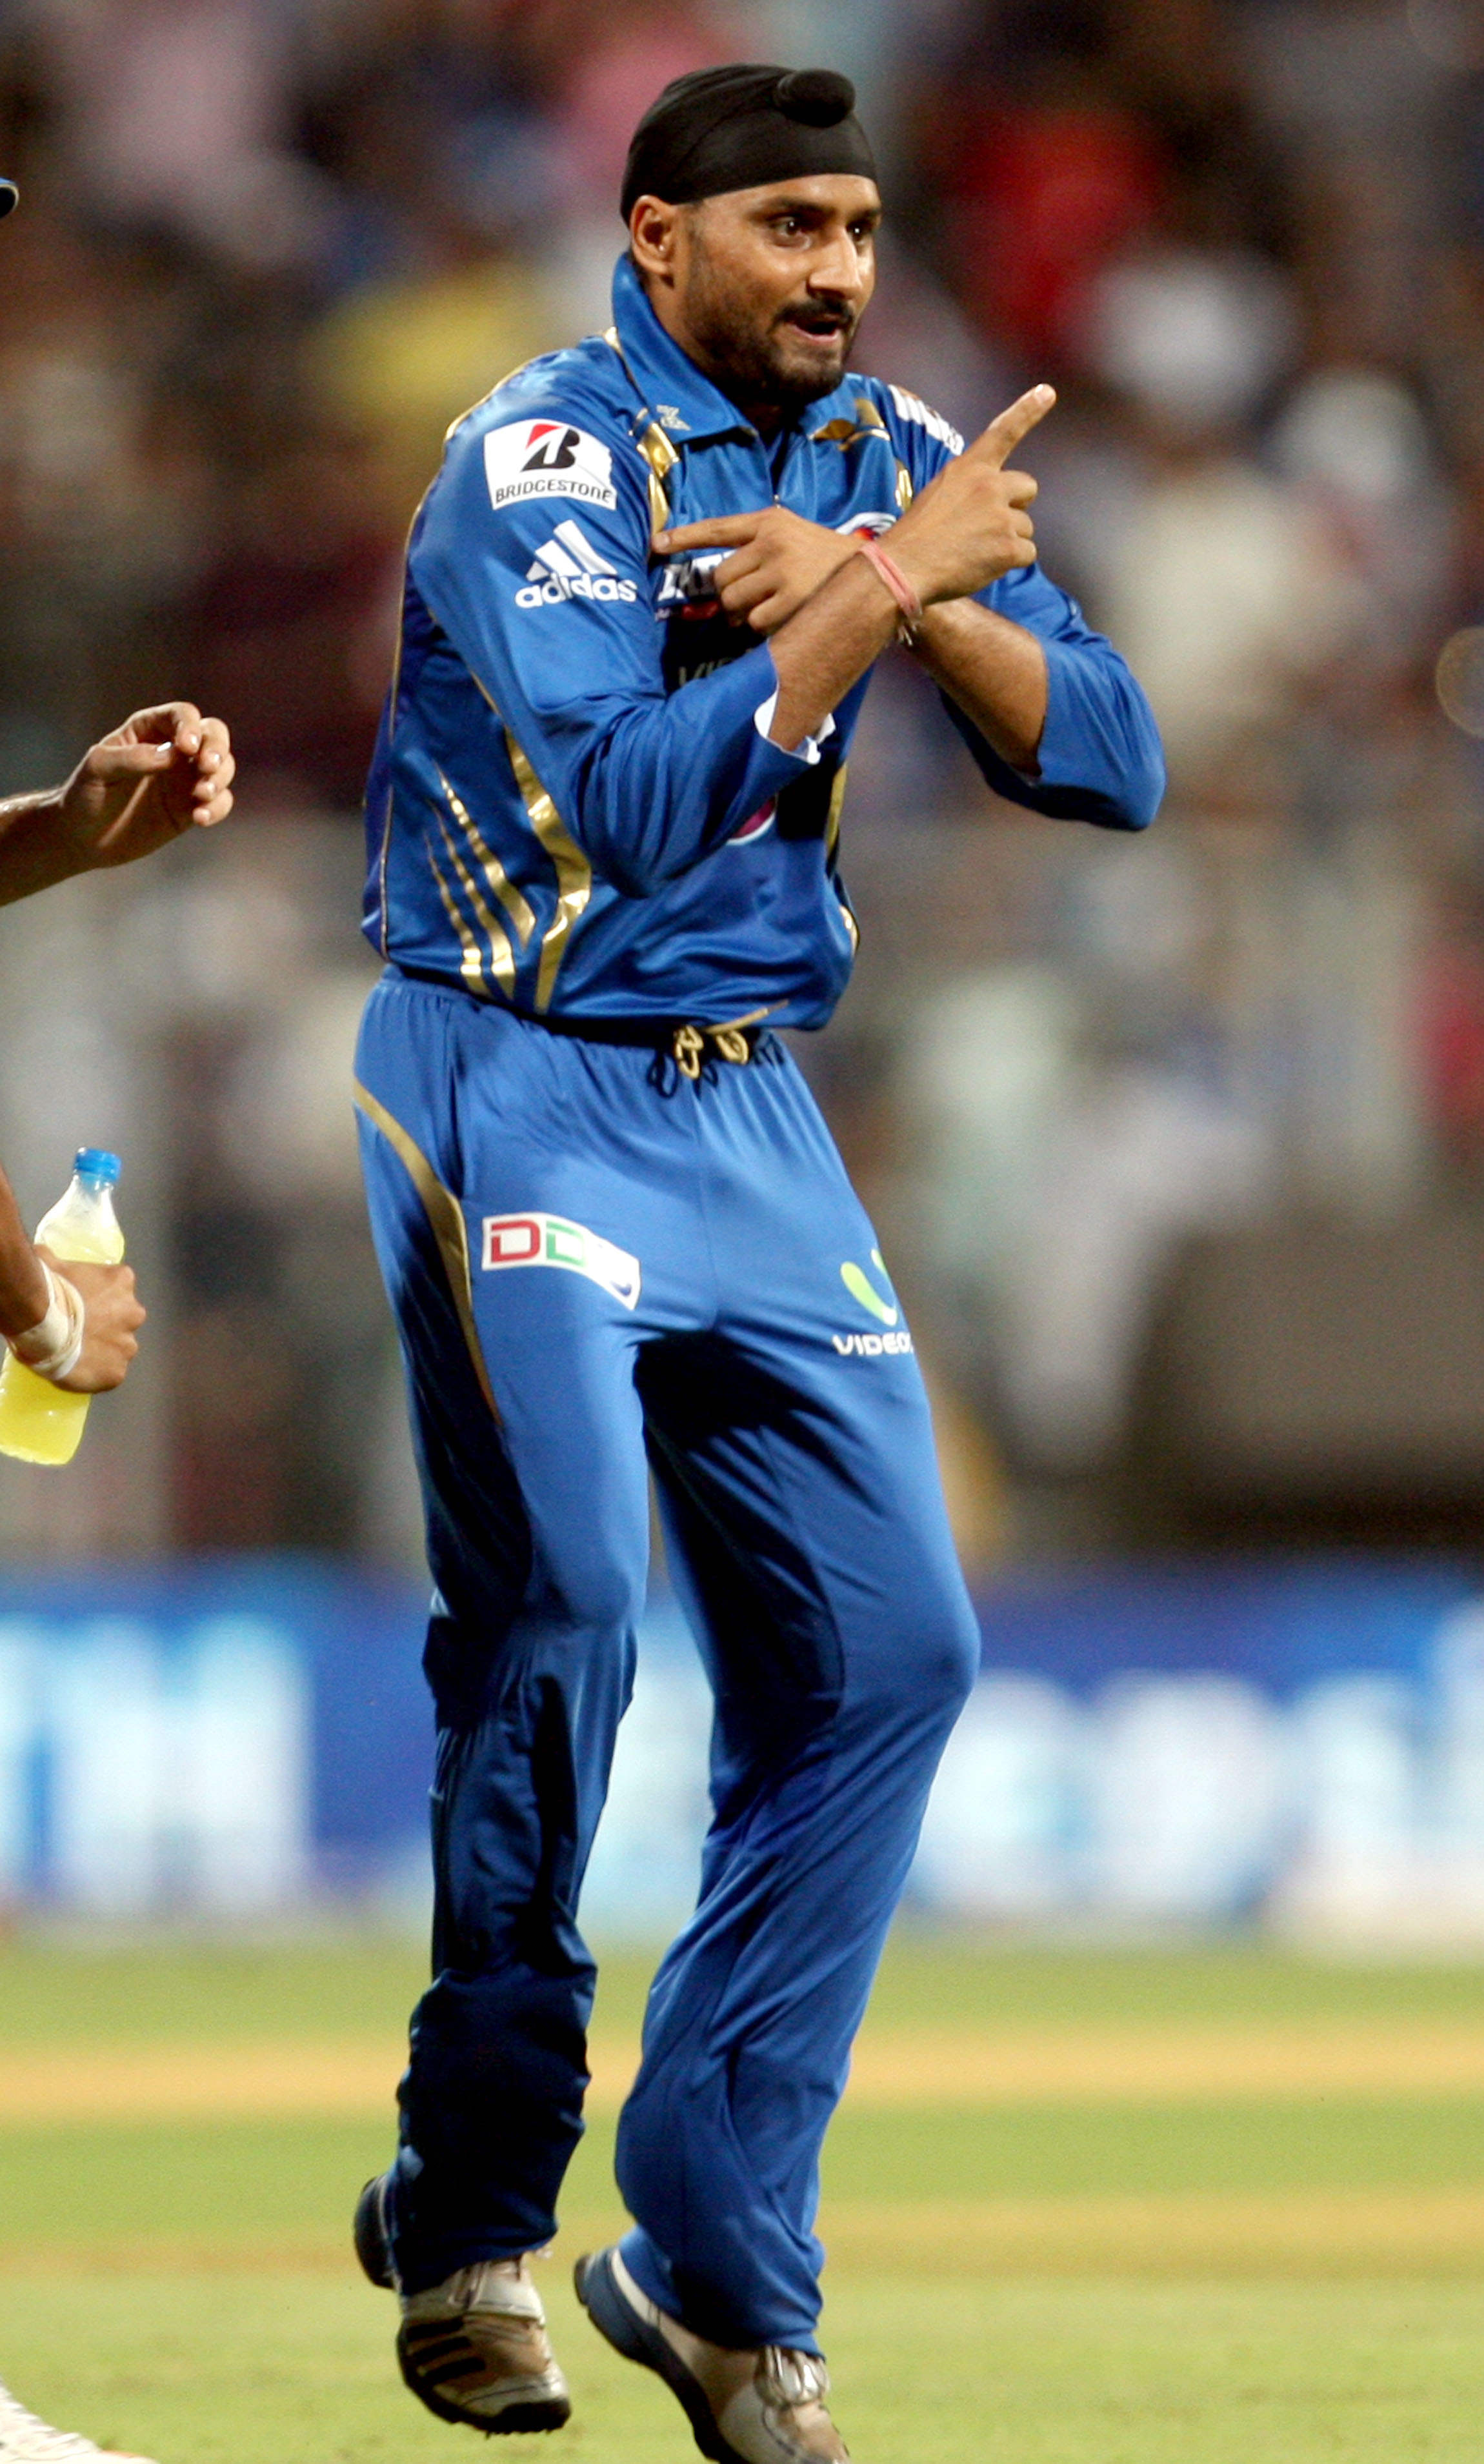 Picture Of Harbhajan Singh Dancing On Pitch